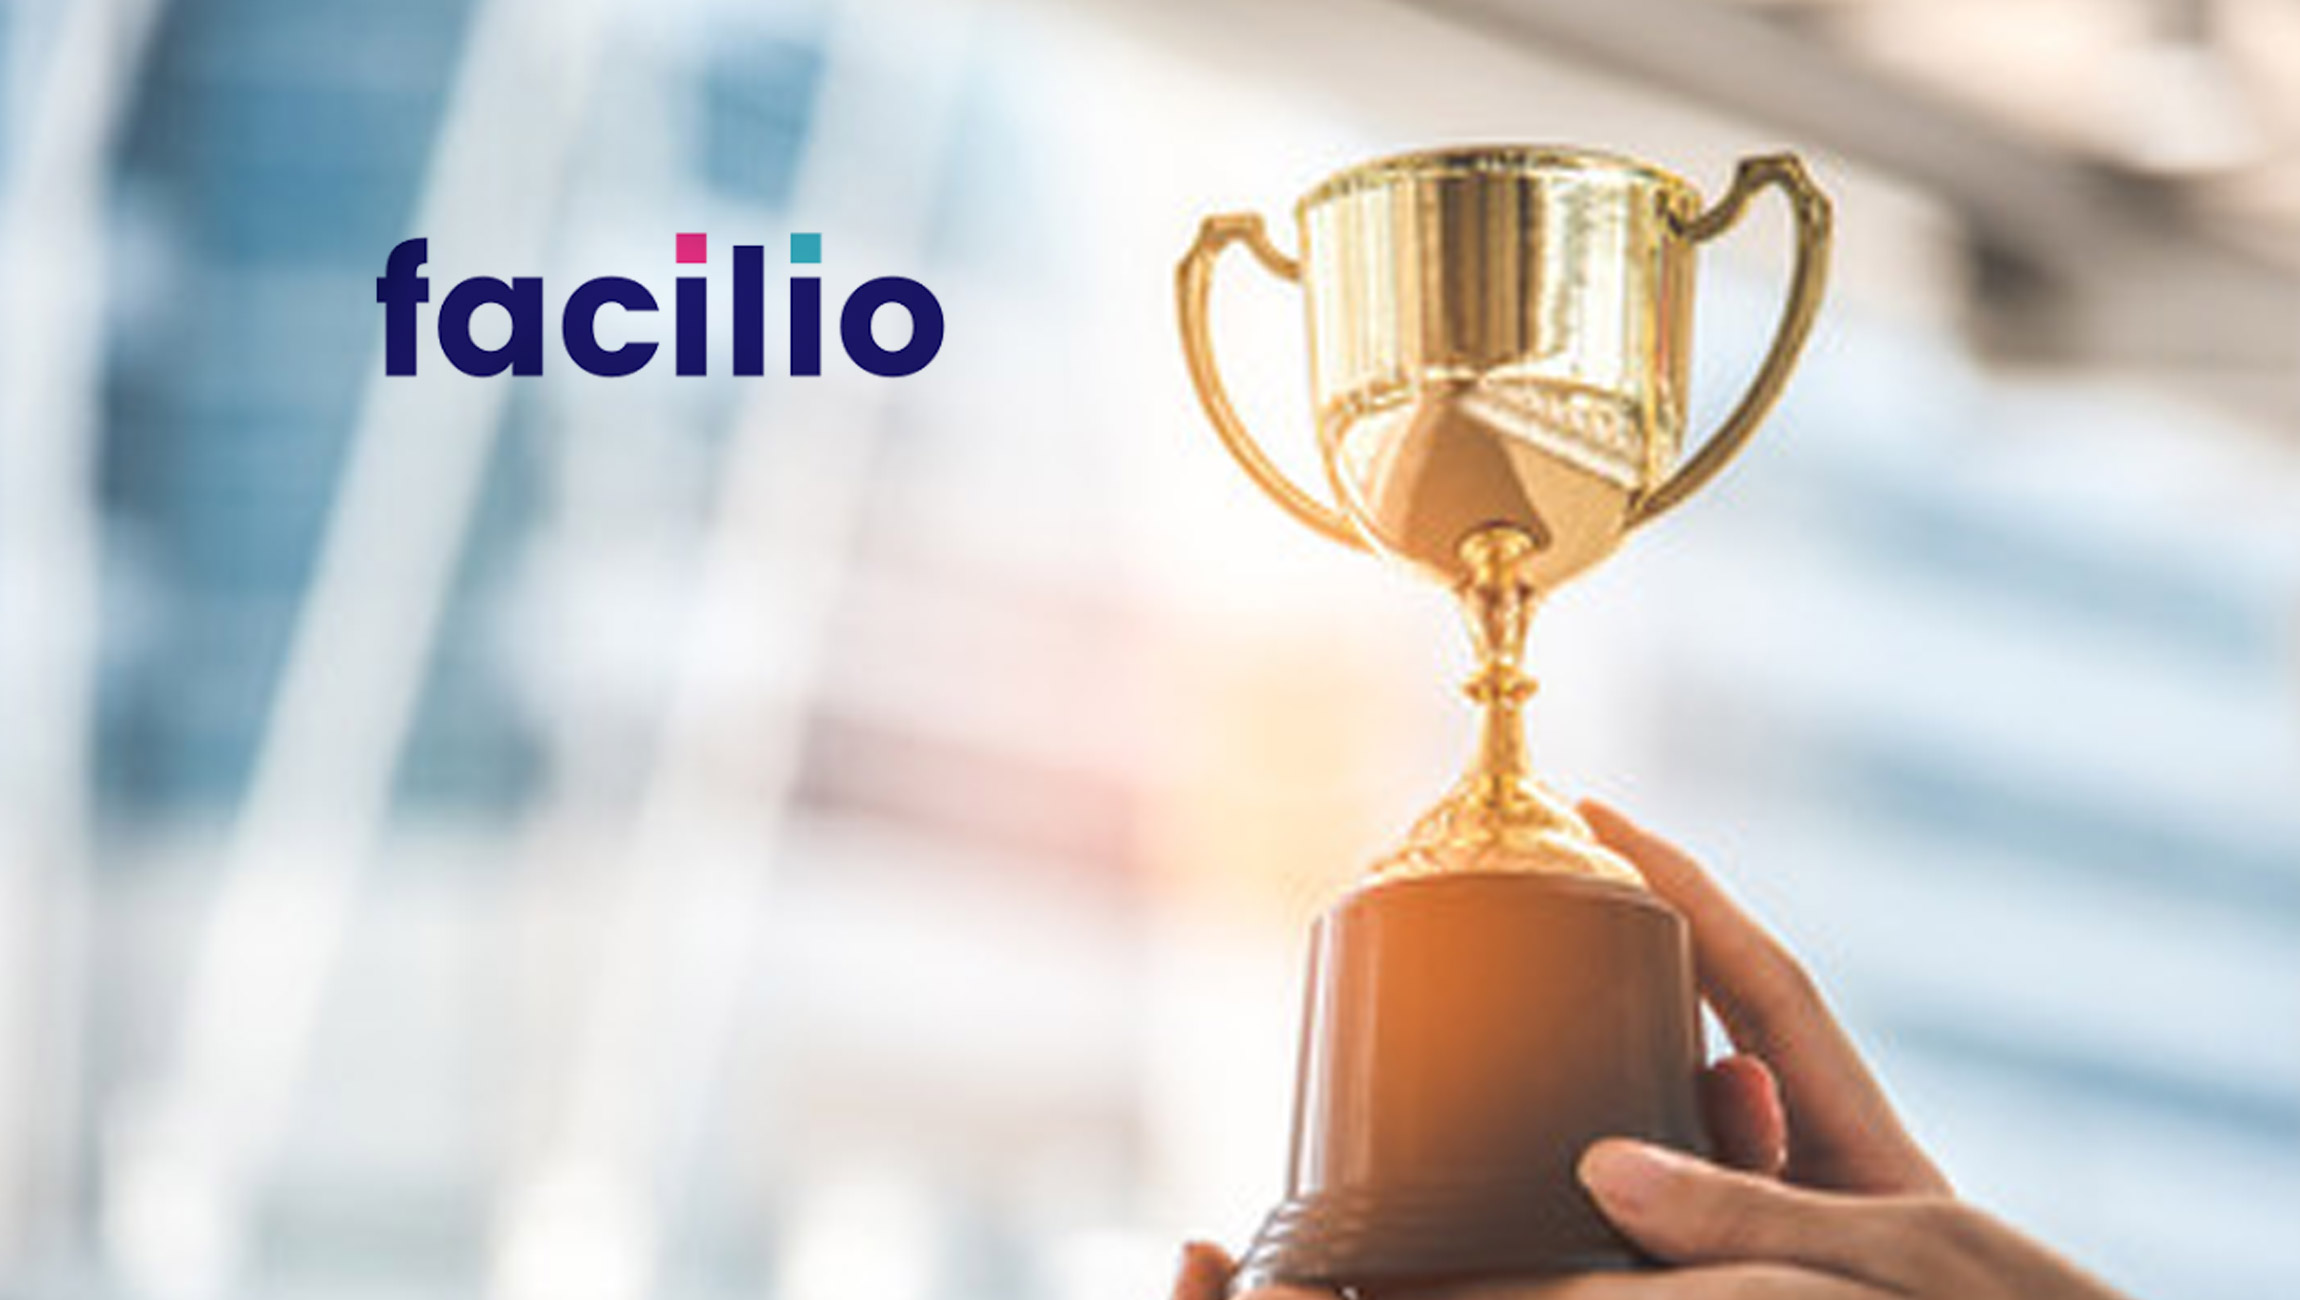 Facilio Earns 2021 Frost & Sullivan Product Leadership Award for Global IoT-based Property Operations Solution